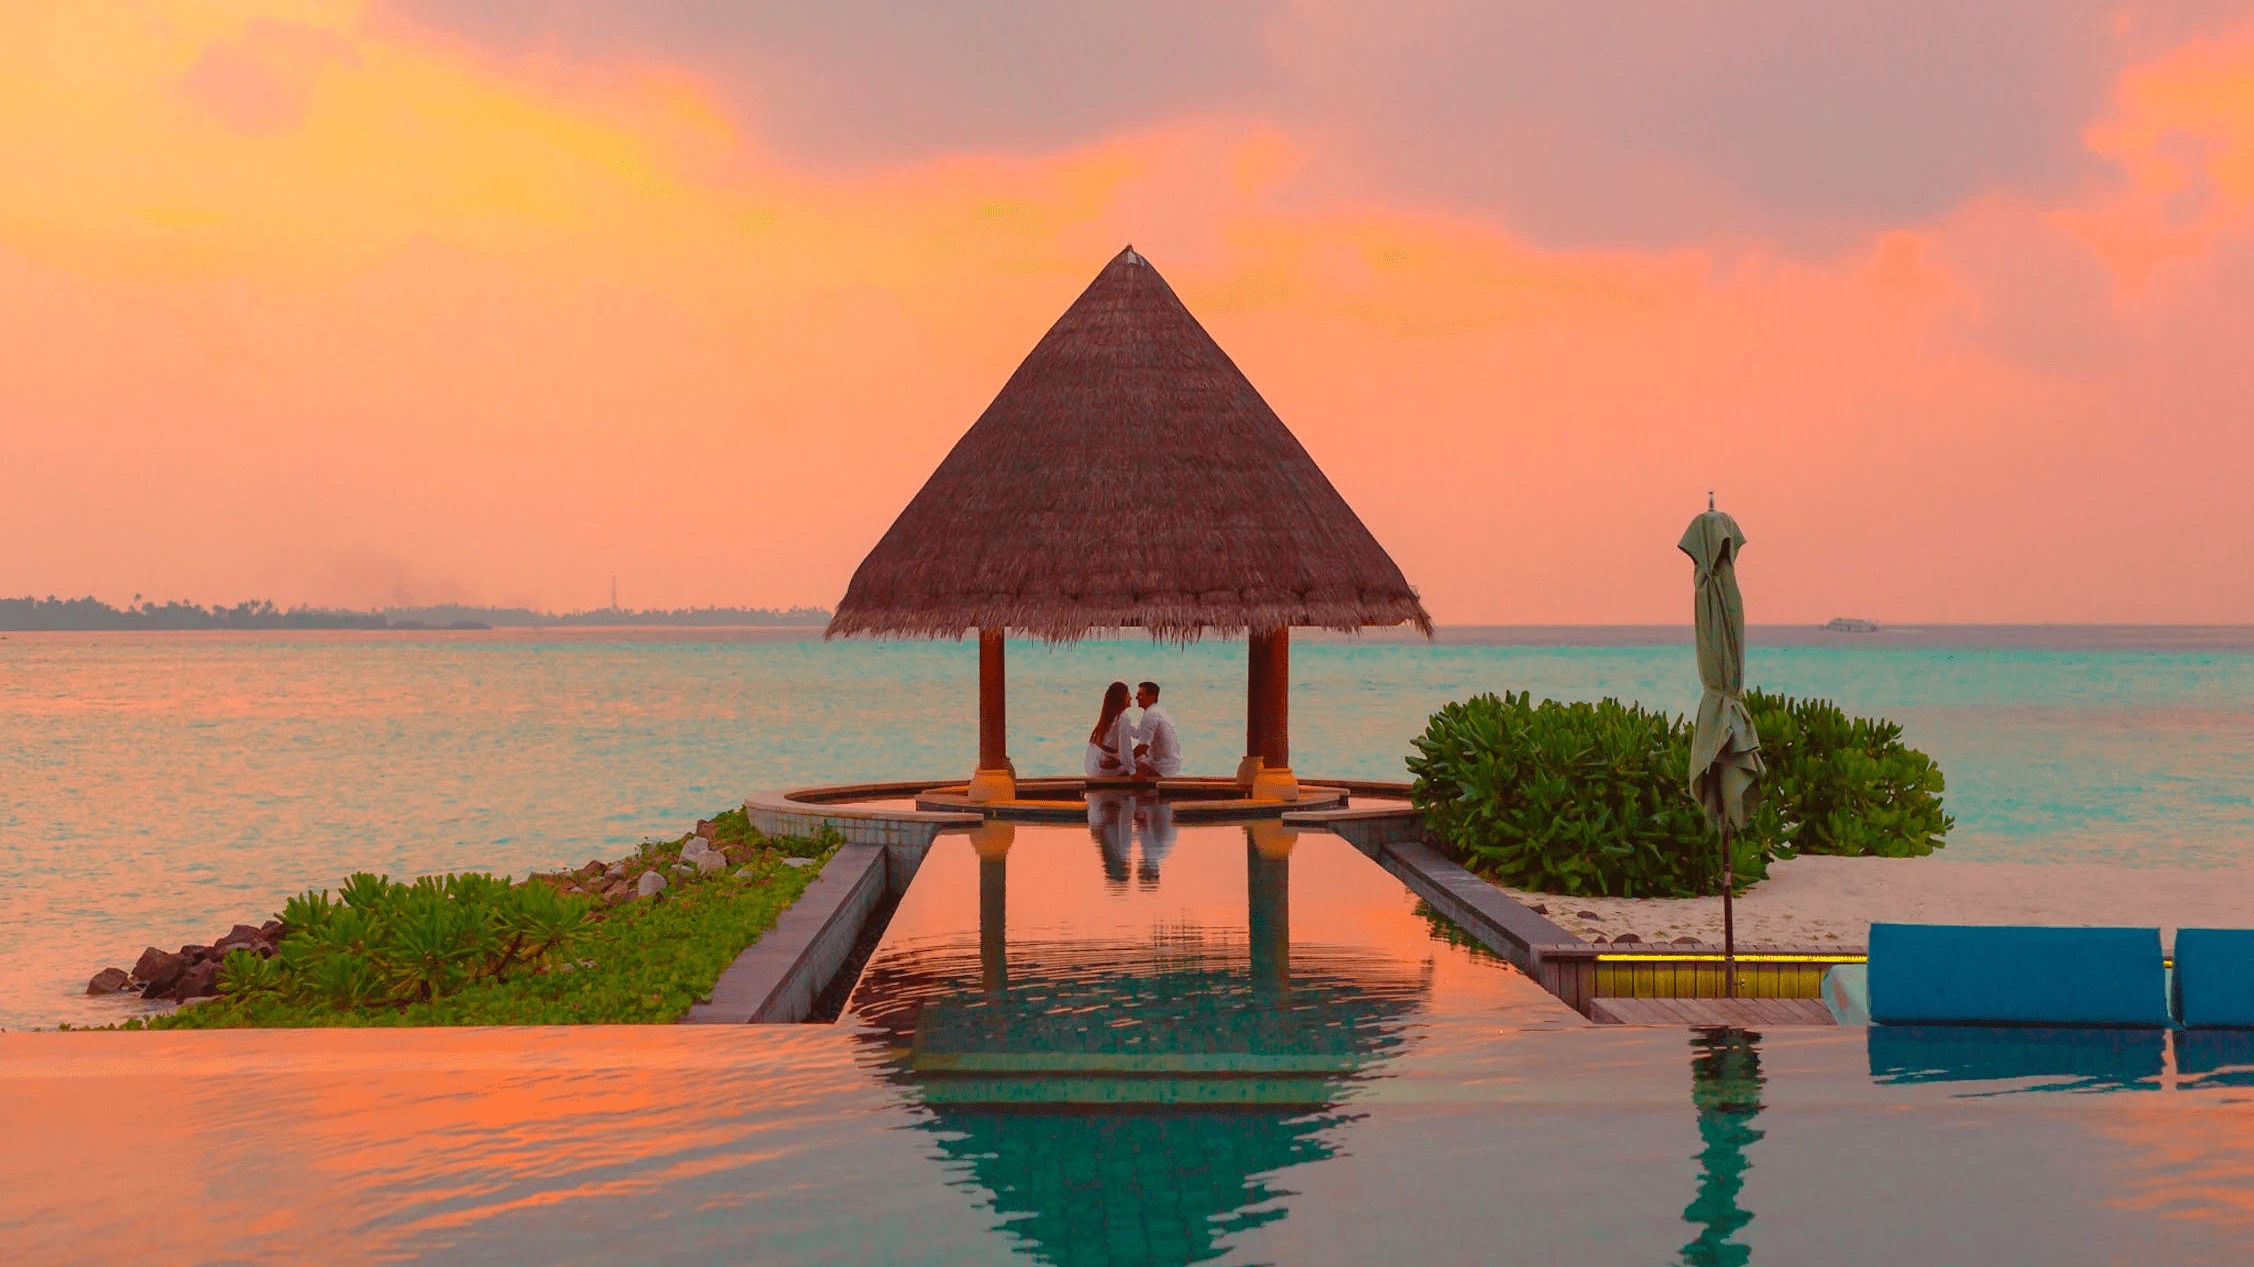 Couple during sunset near the pool on Maldives beach